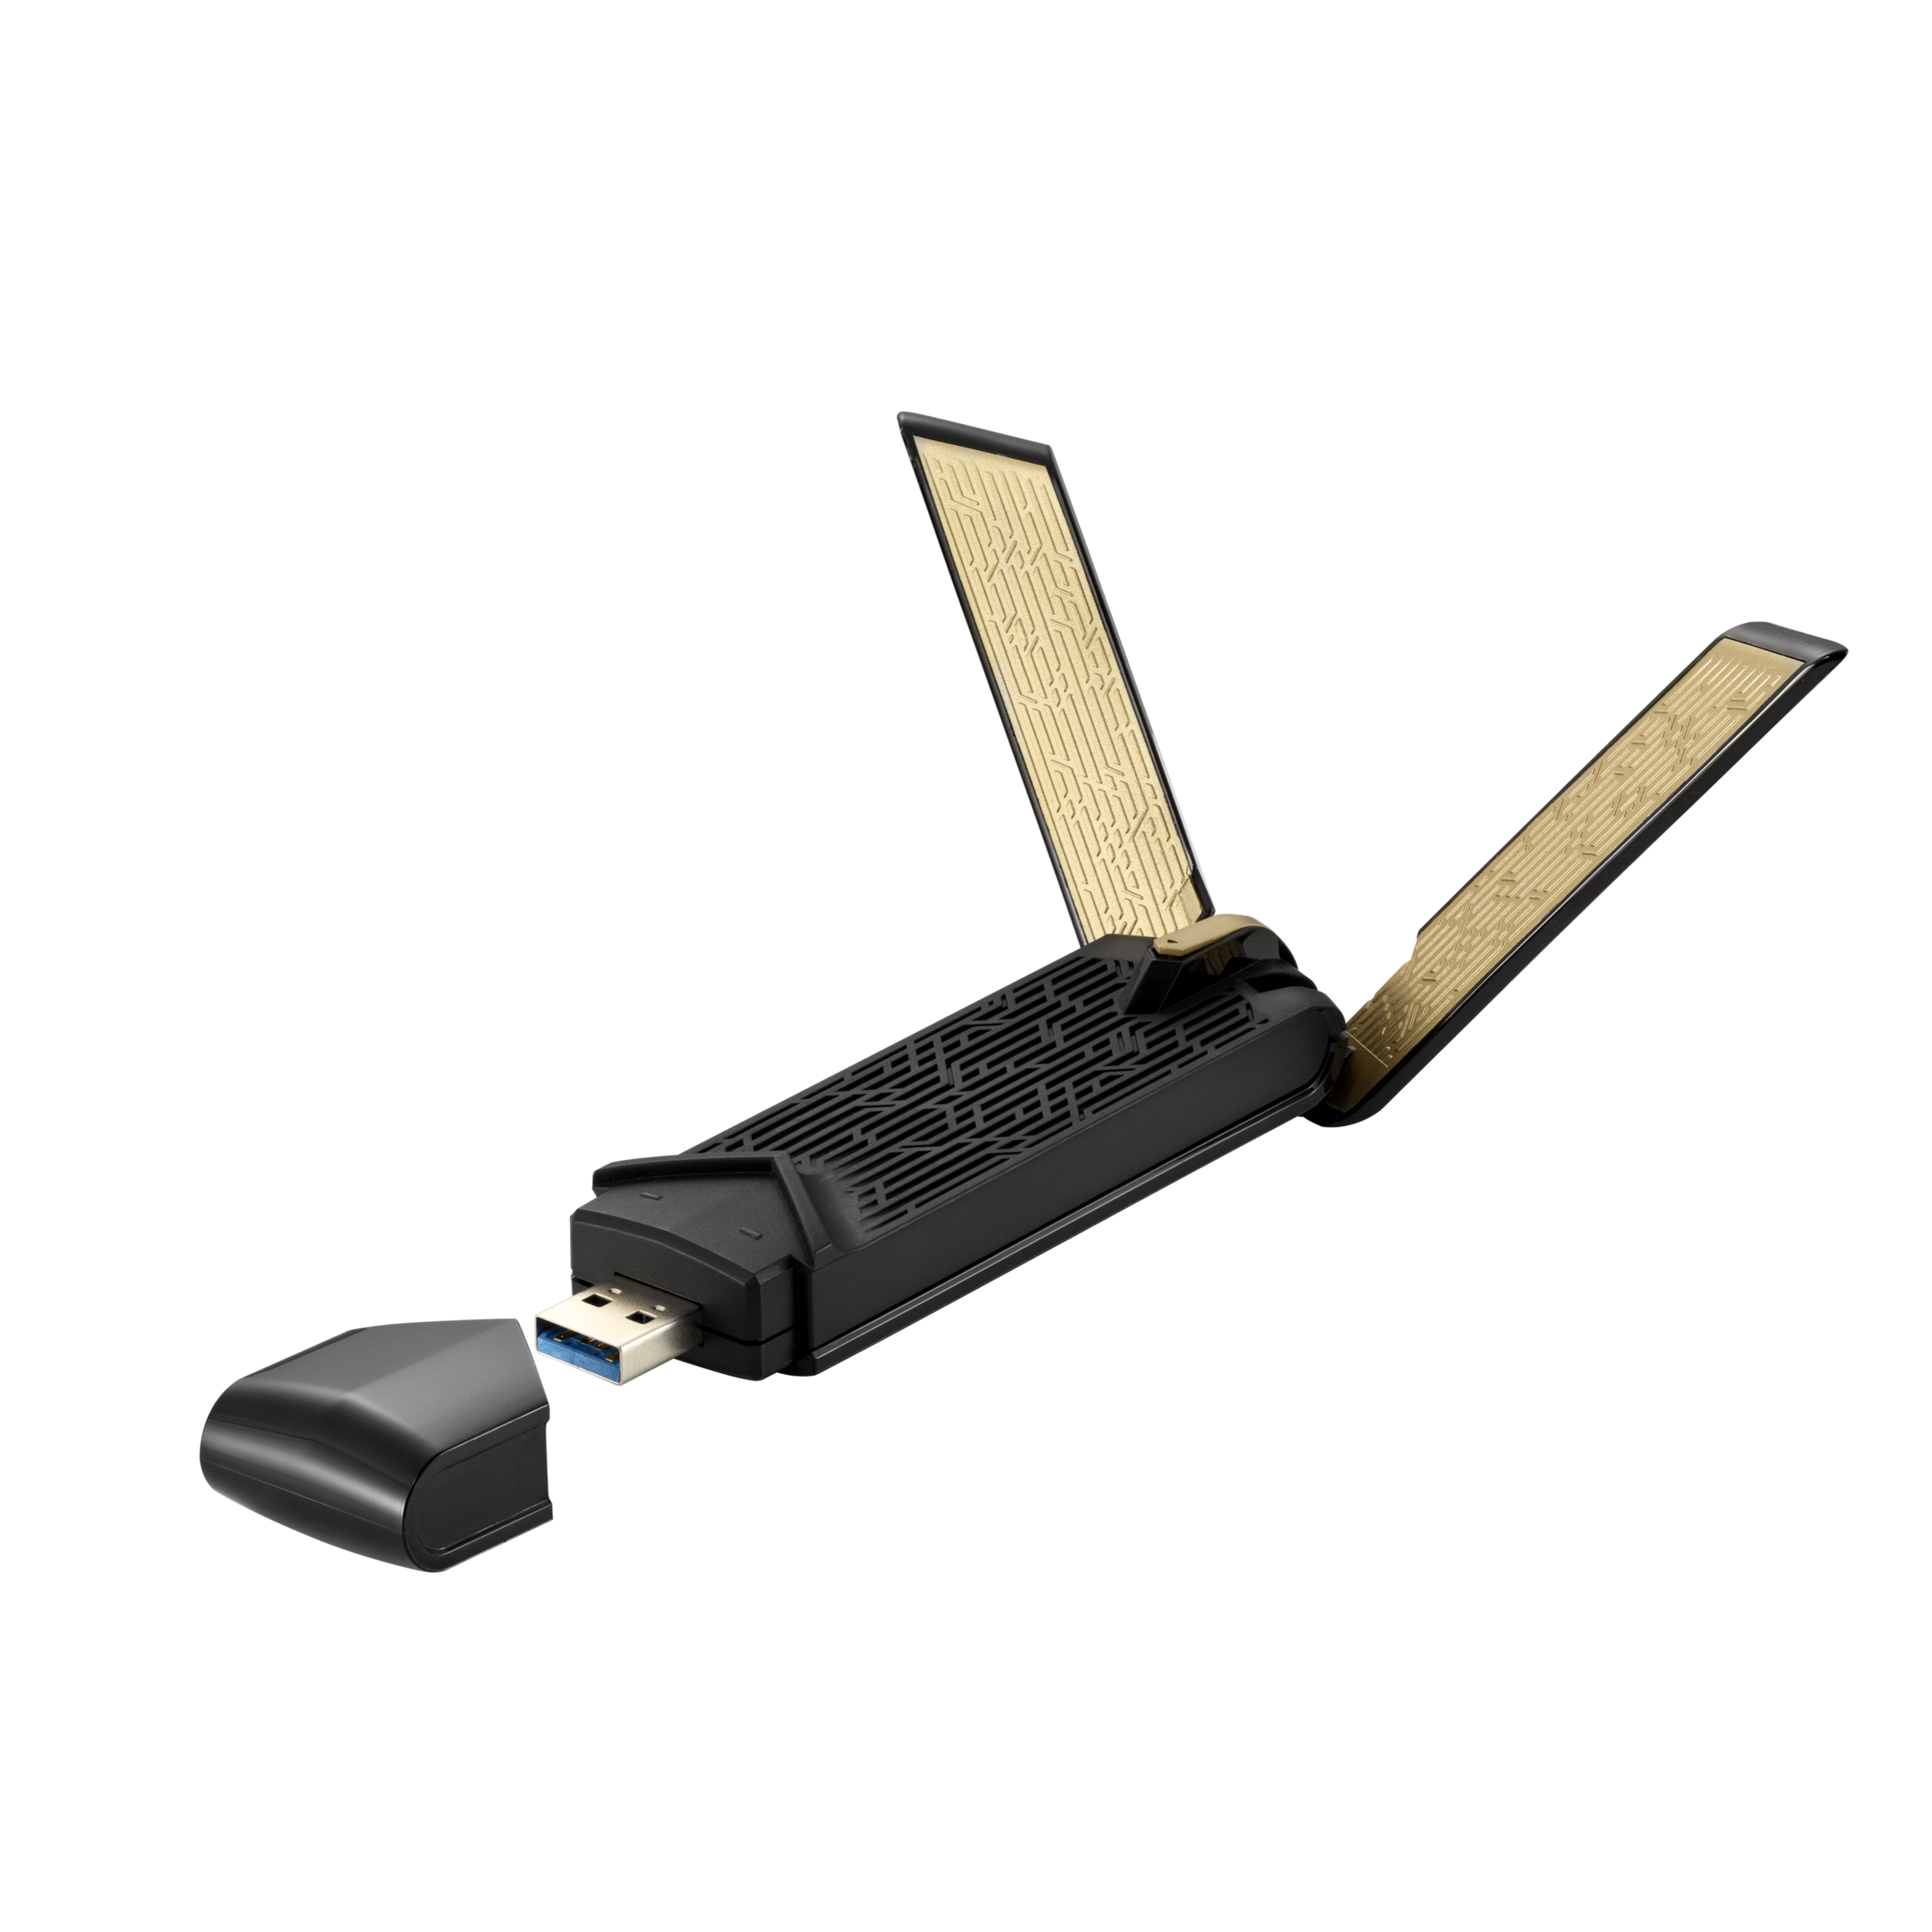 USB-AX56｜Adapters｜ASUS Global